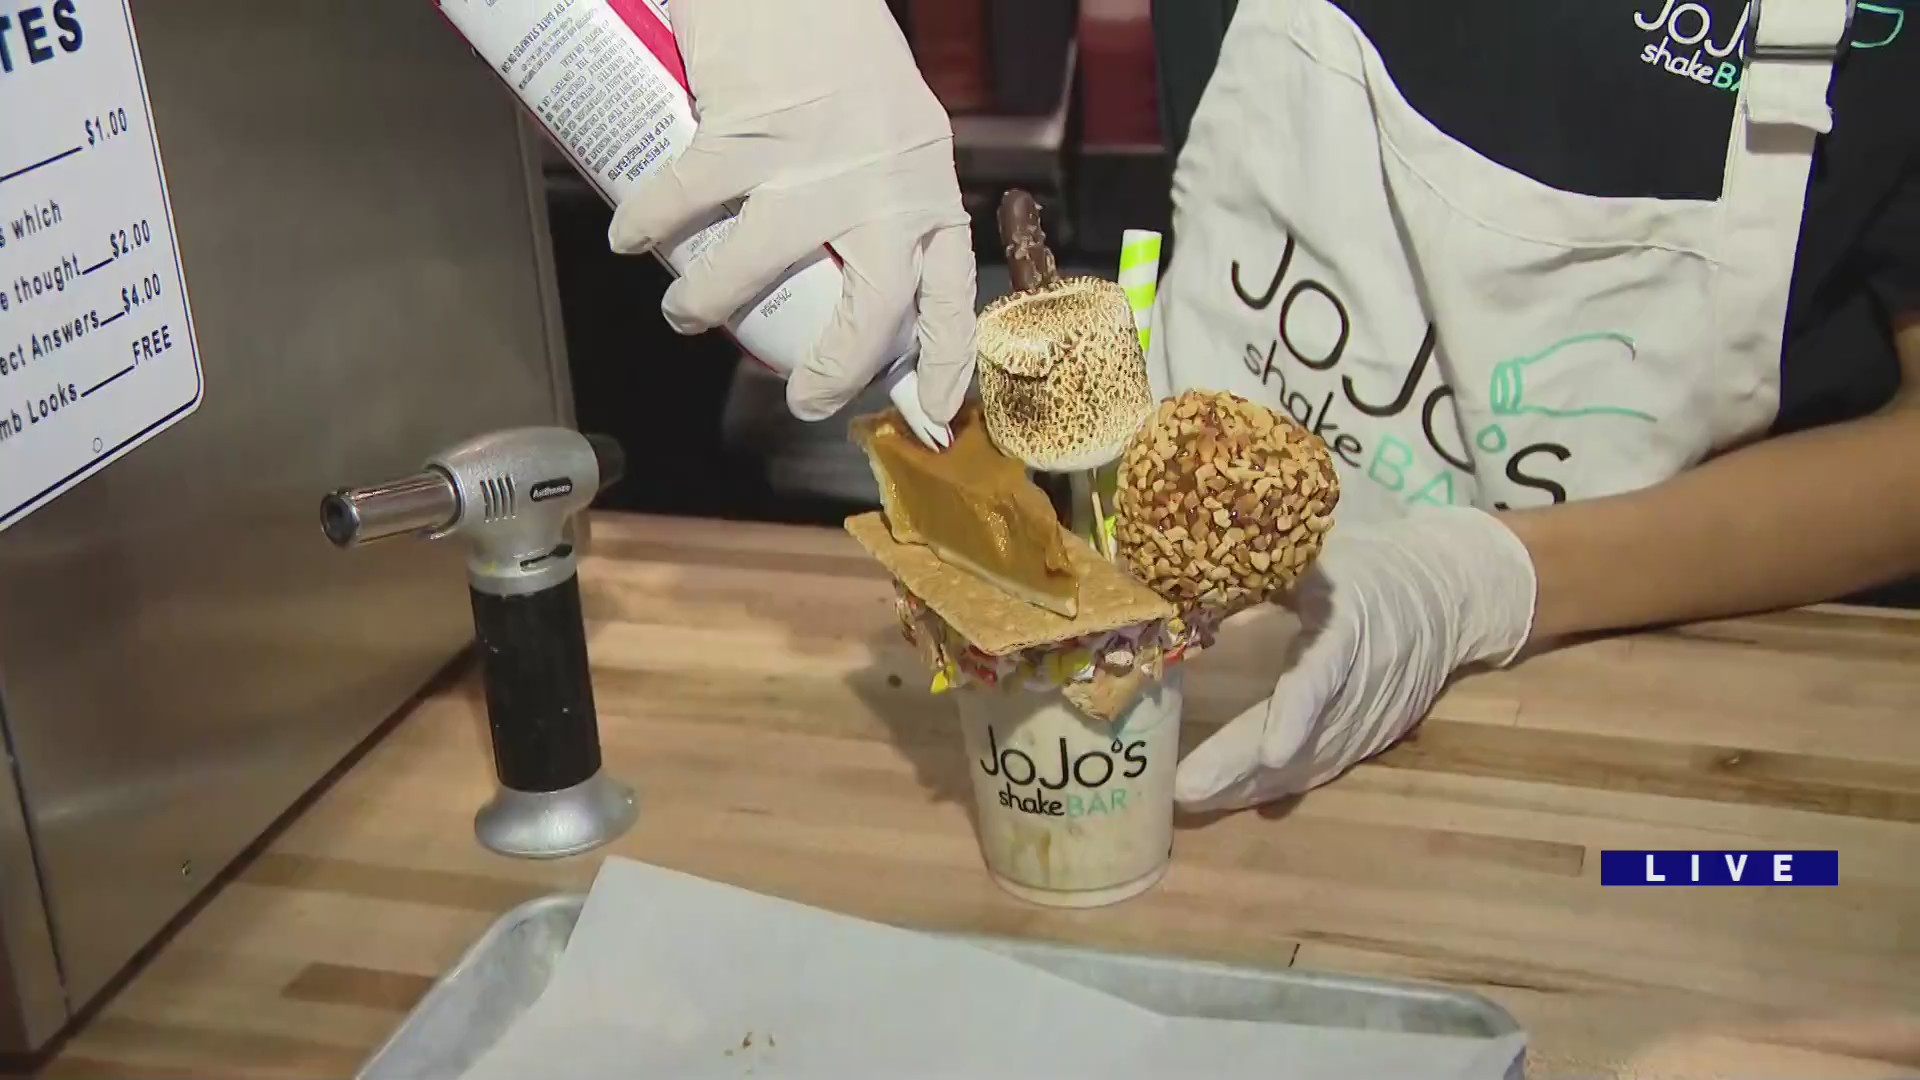 Around Town checks out JoJo’s Shake Bar and their pumpkin patch